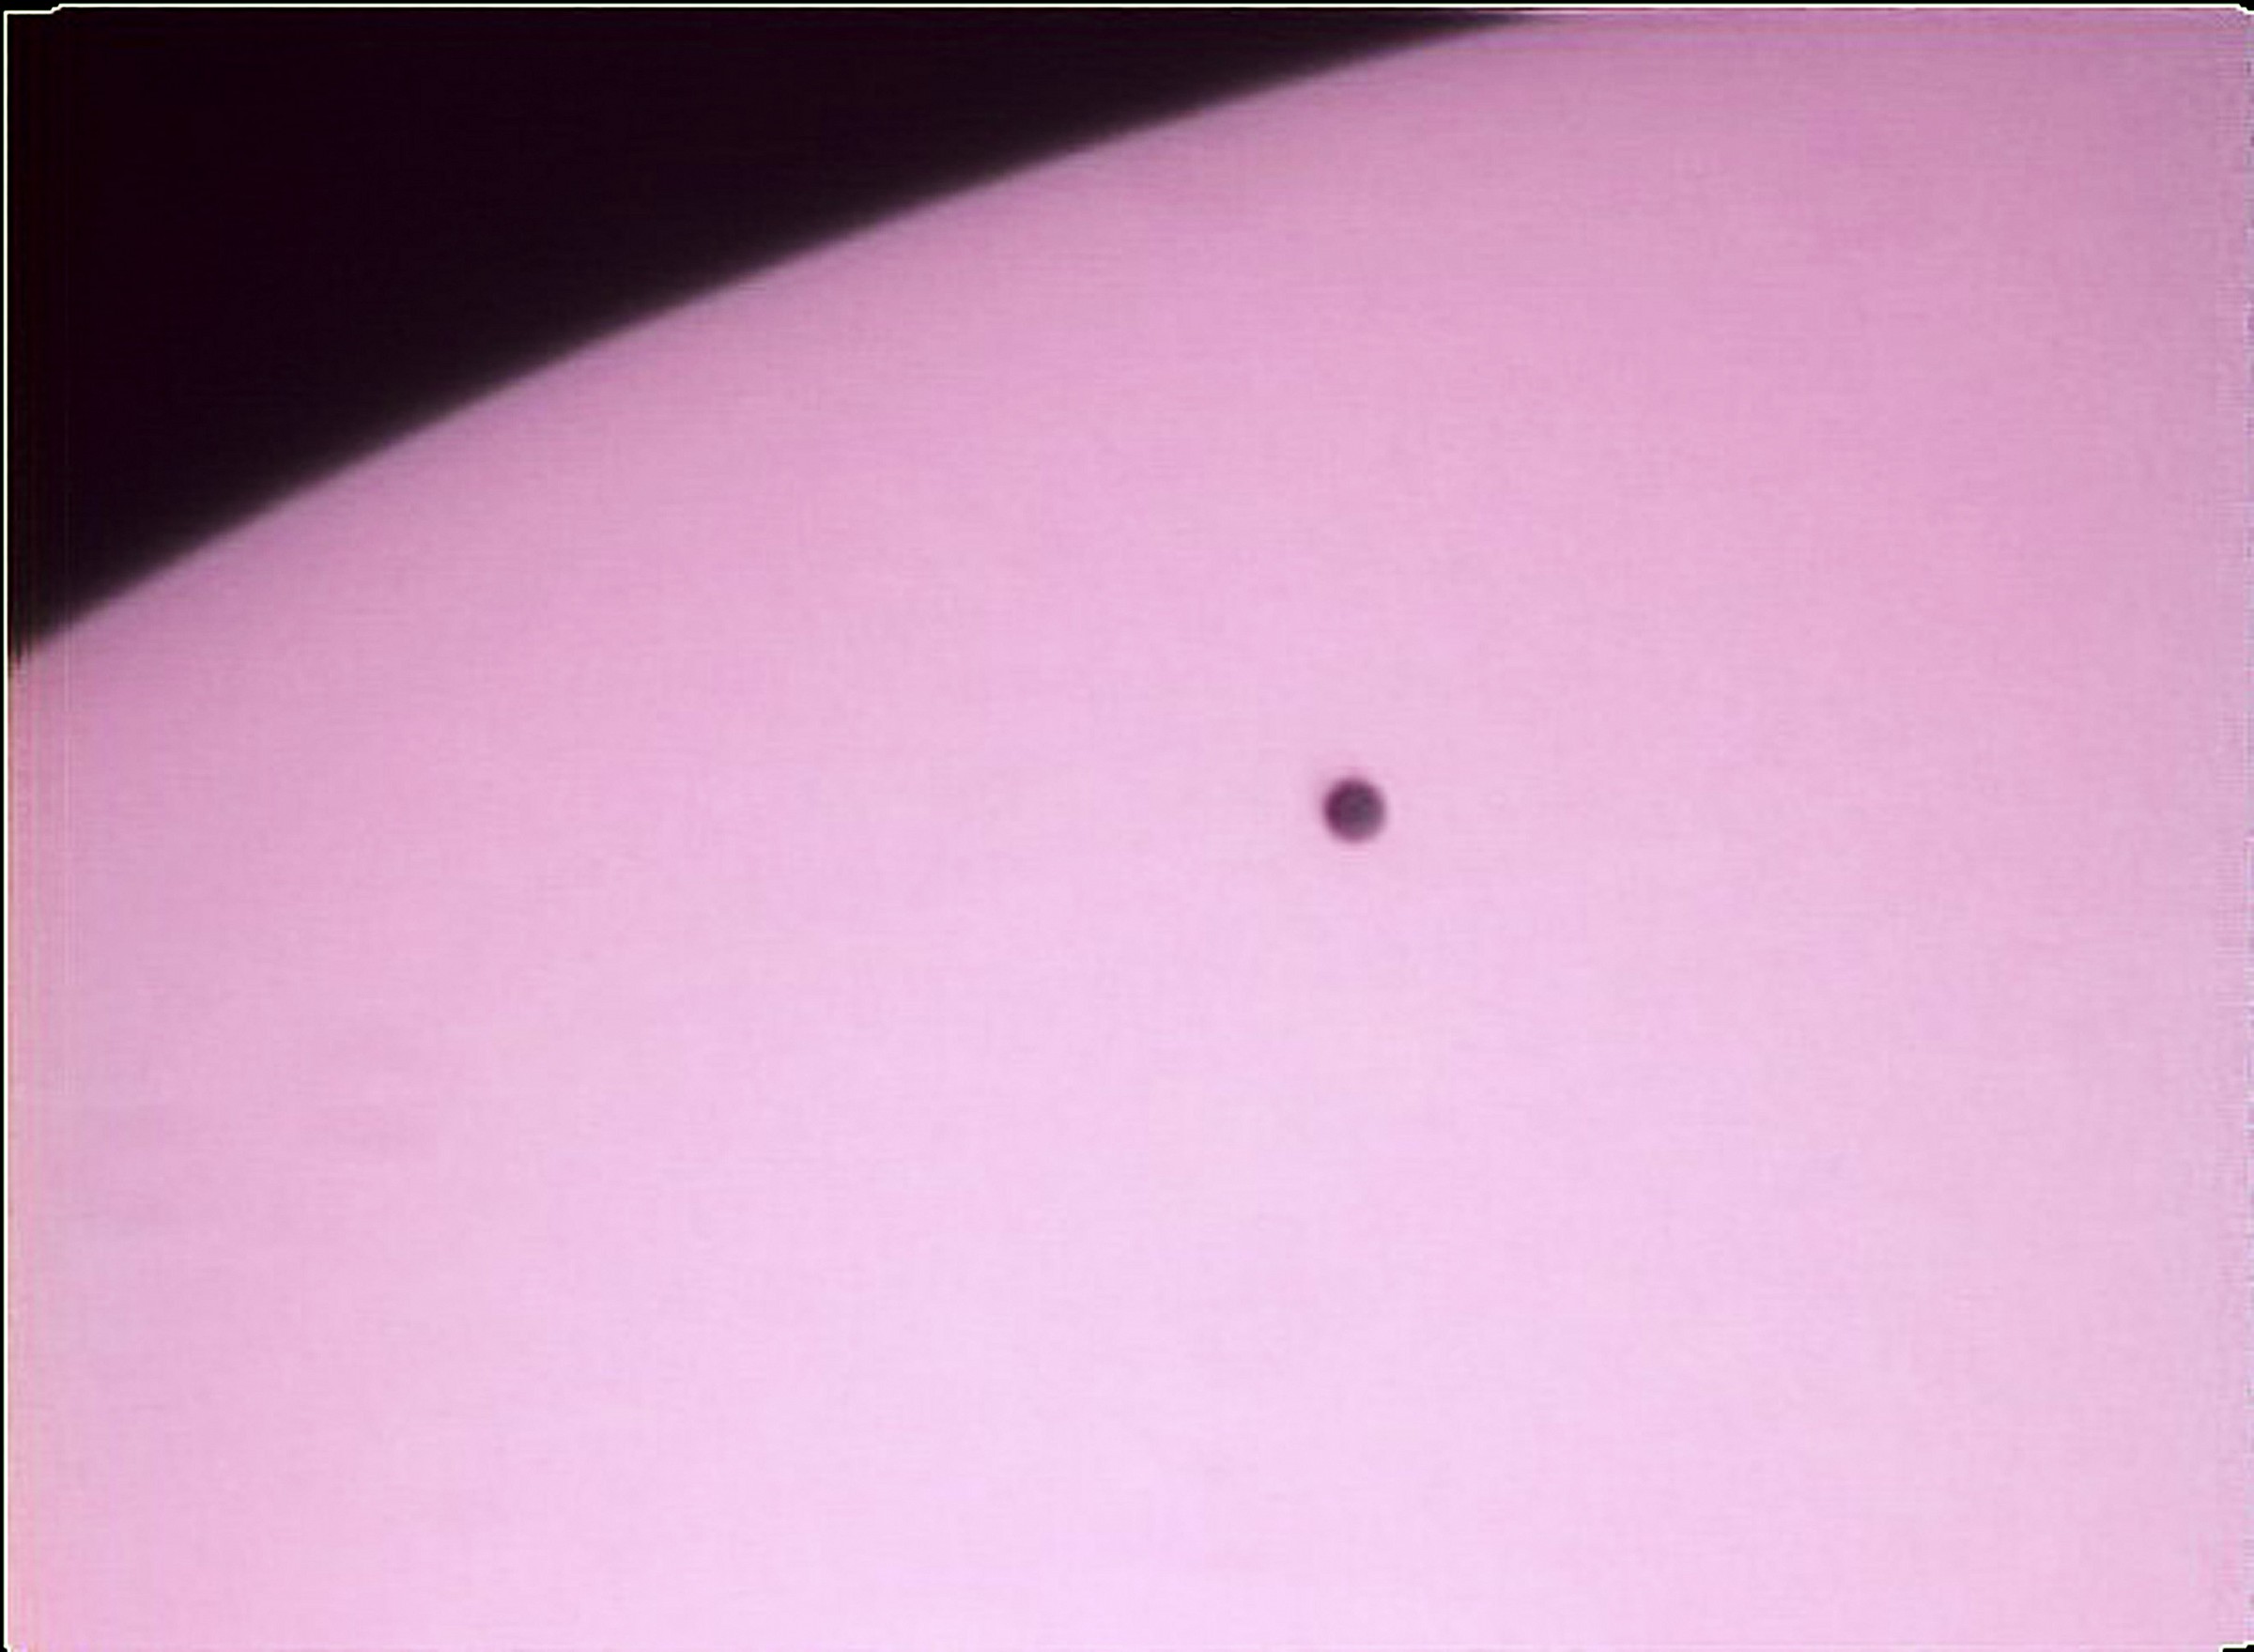 Mercury on the disk of the sun...